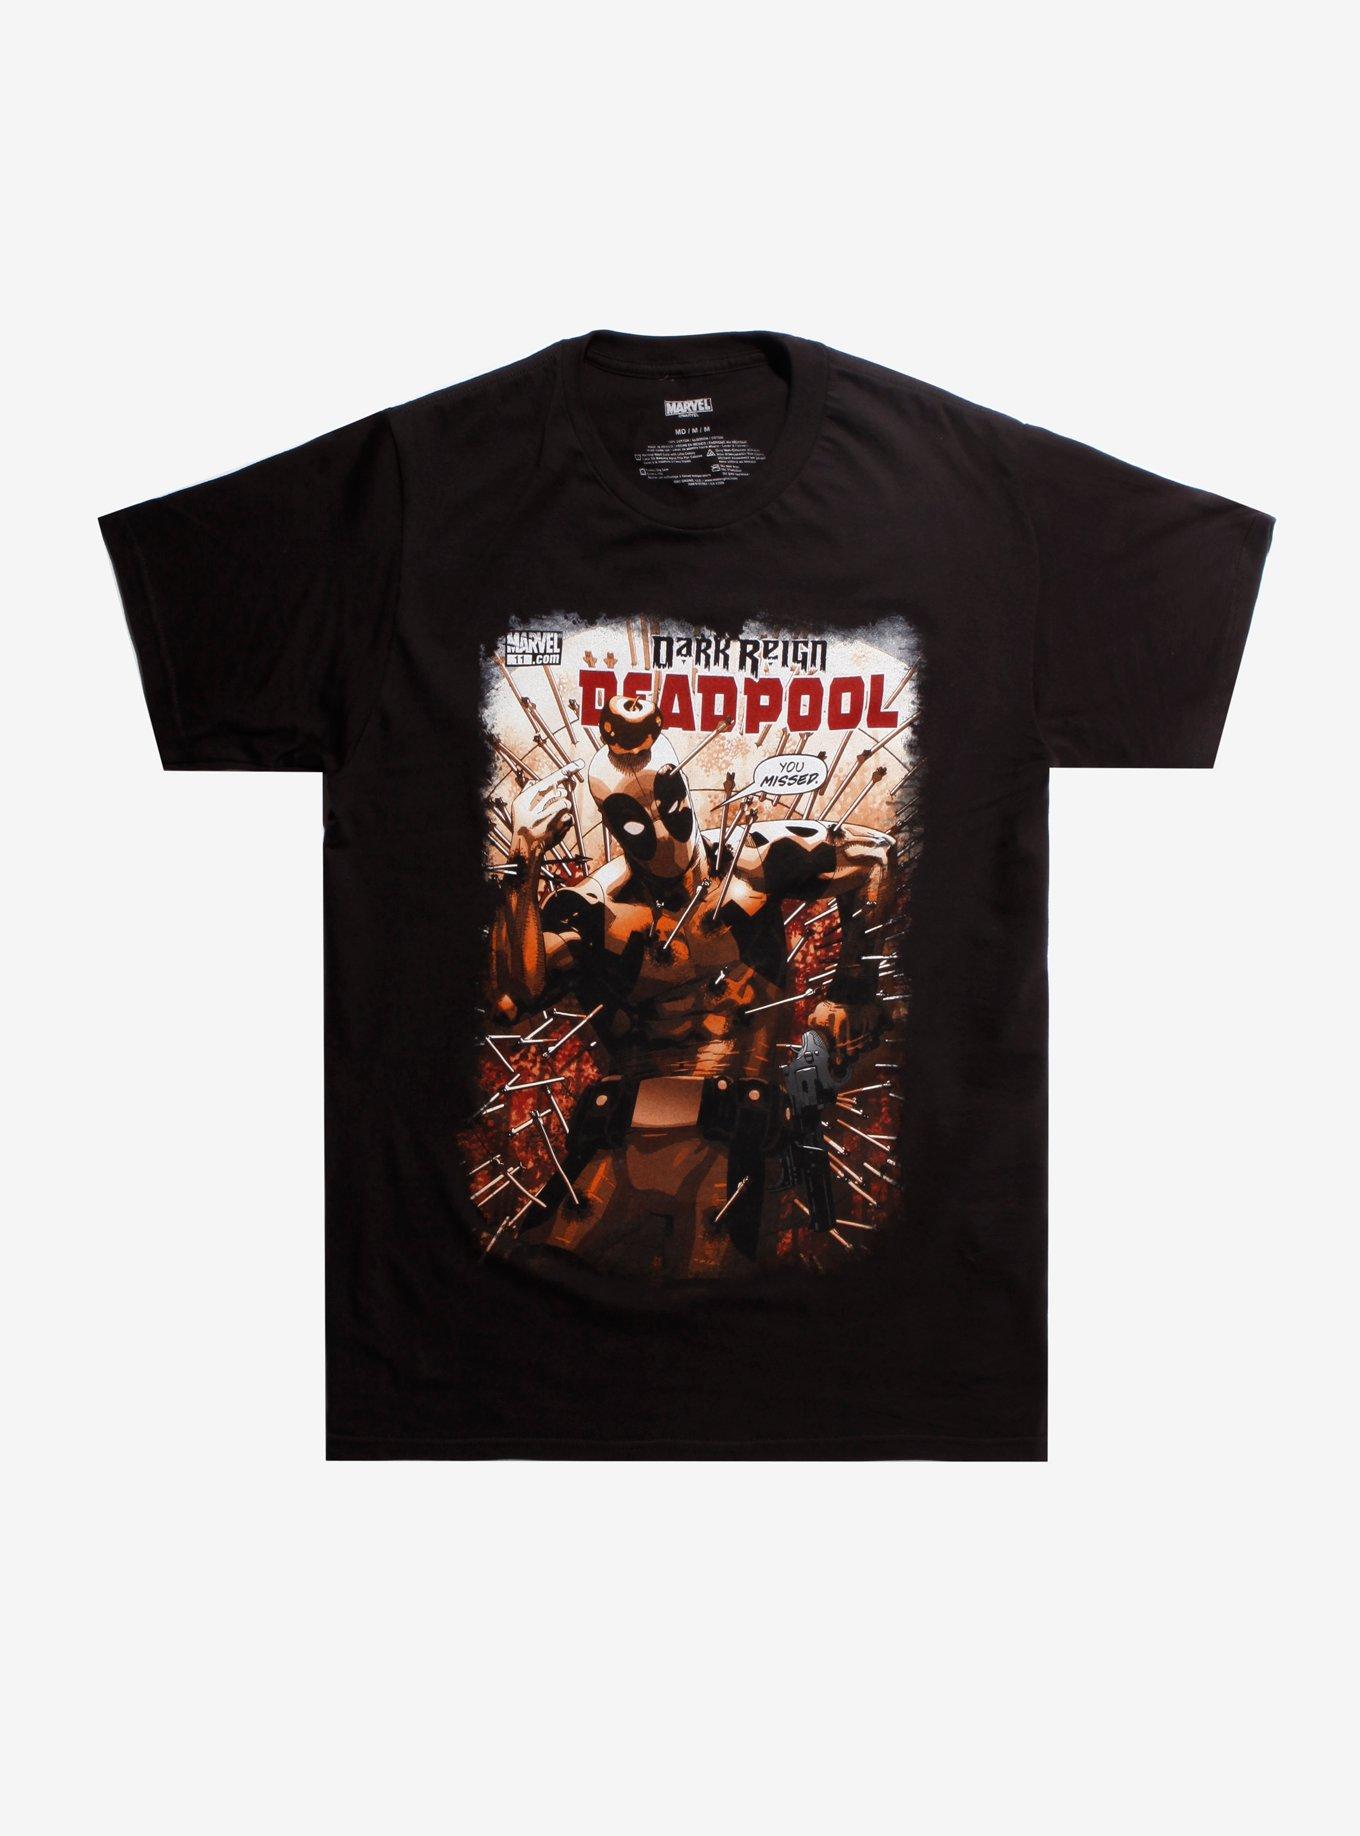 Marvel Deadpool You Missed T-Shirt Hot Topic Exclusive, BLACK, hi-res